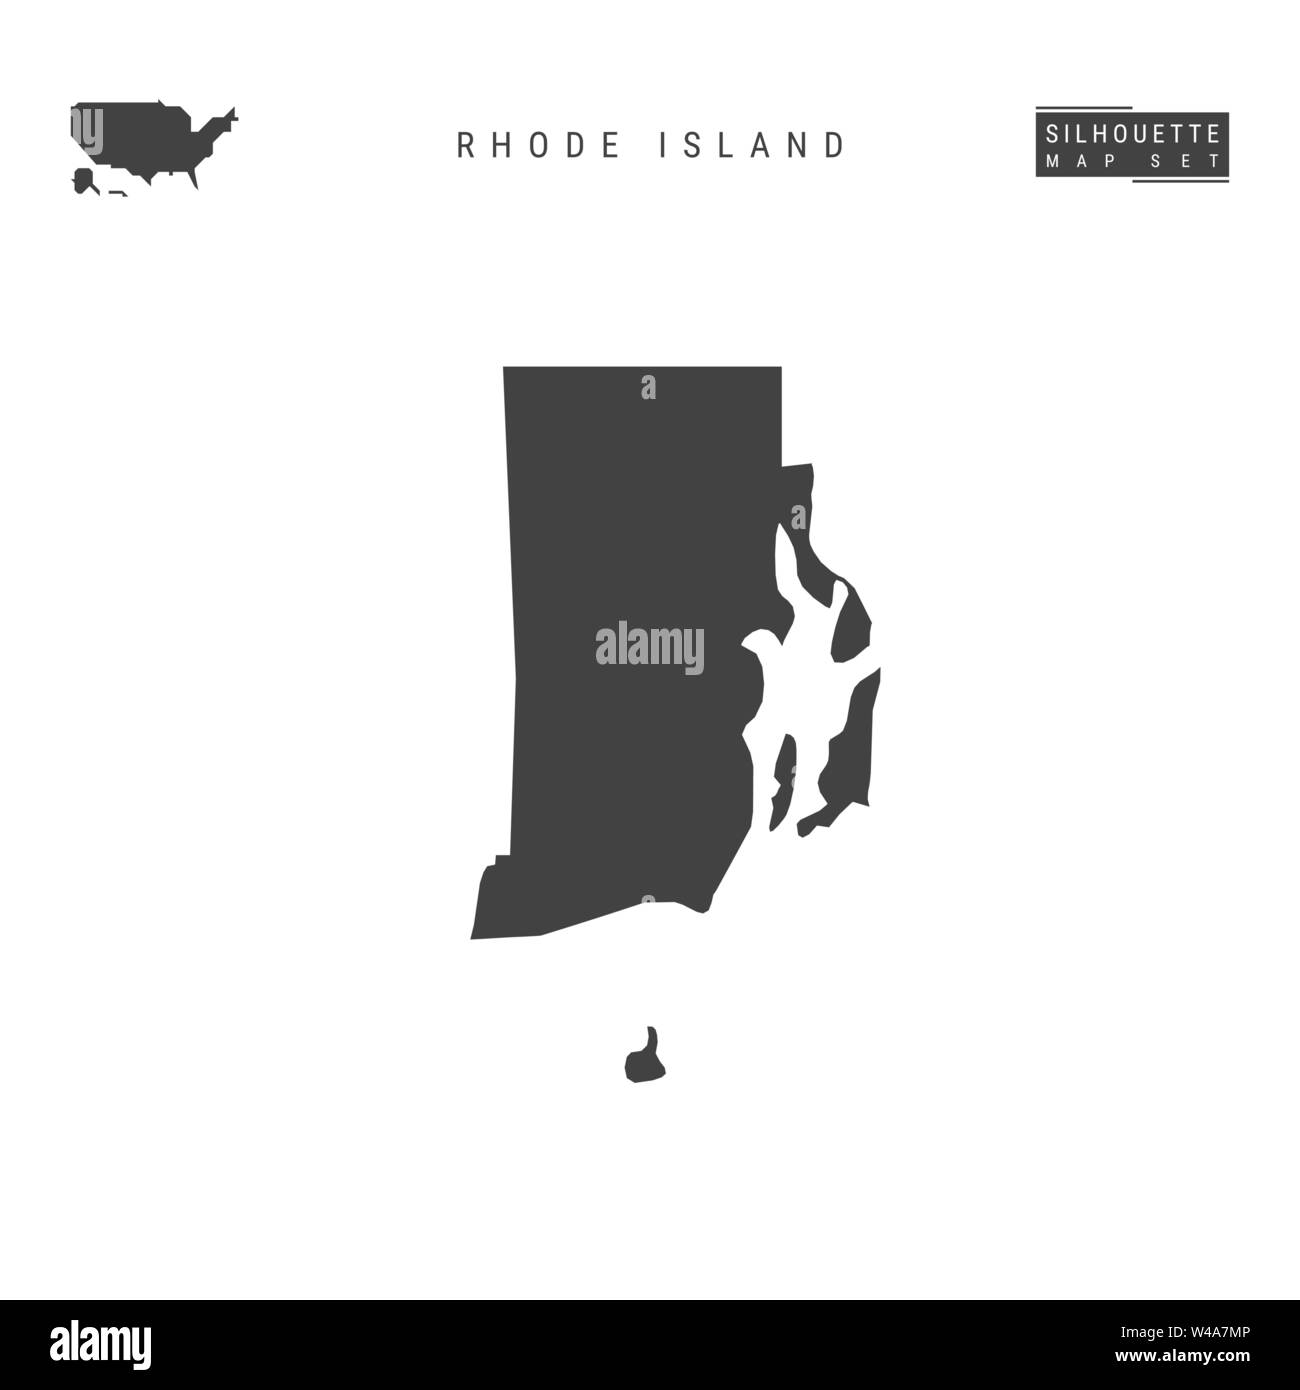 Rhode Island US State Blank Vector Map Isolated on White Background. High-Detailed Black Silhouette Map of Rhode Island. Stock Vector